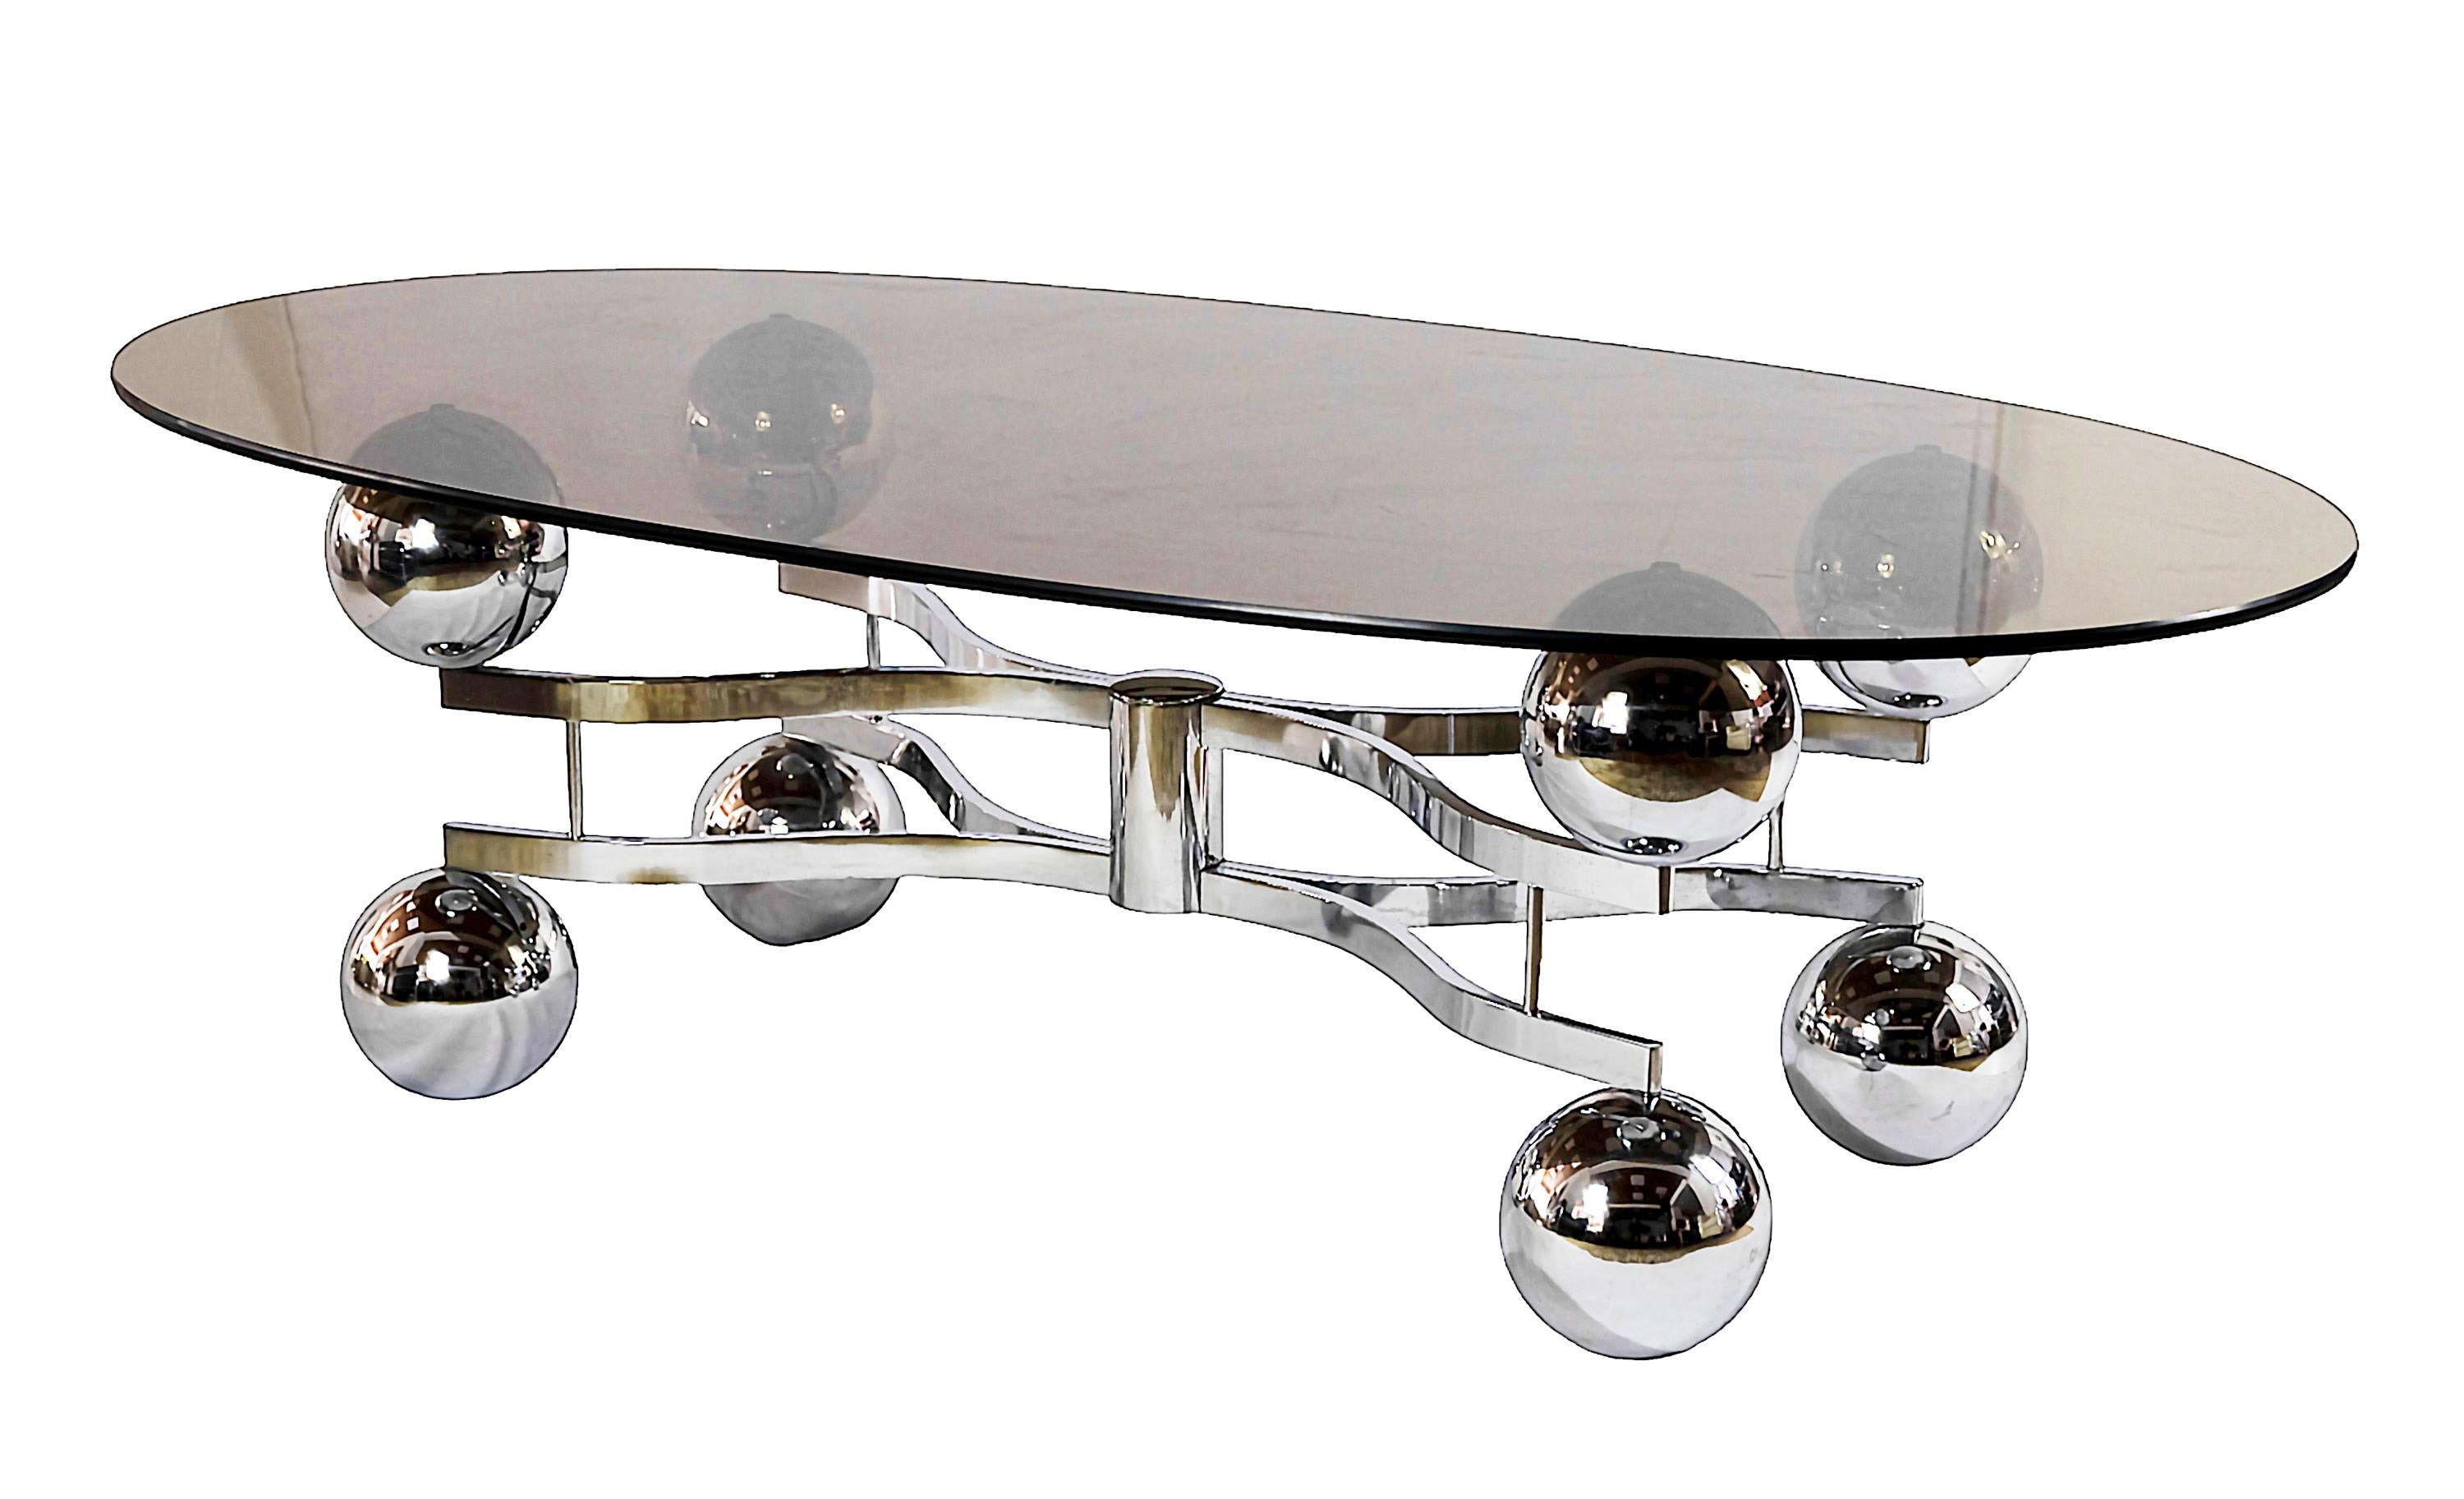 Vintage Italian space age design coffee/sofa table from 1970's.
The base is in chromed metal with round bubble shape elements and smoked oval glass top.
Very good/excellent vintage condition.